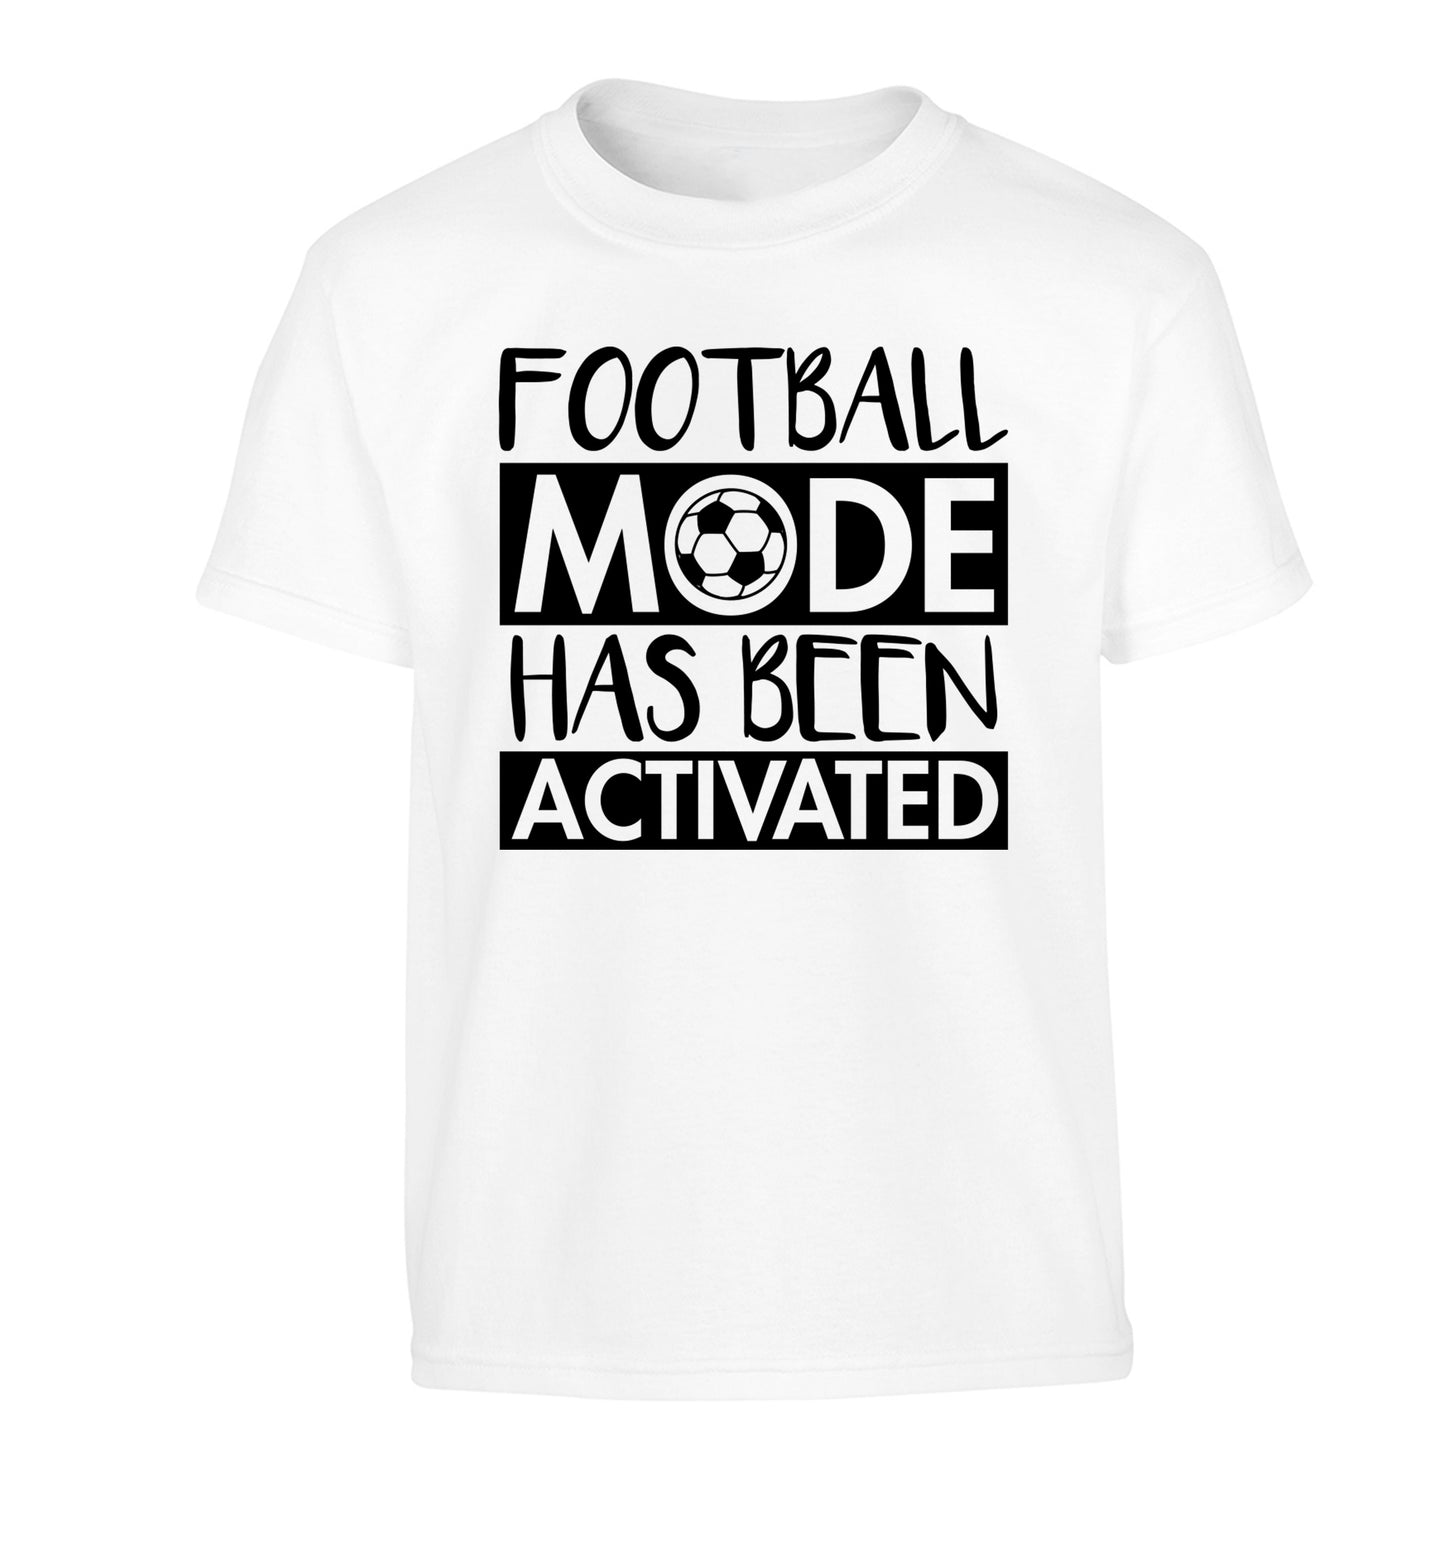 Football mode has been activated Children's white Tshirt 12-14 Years